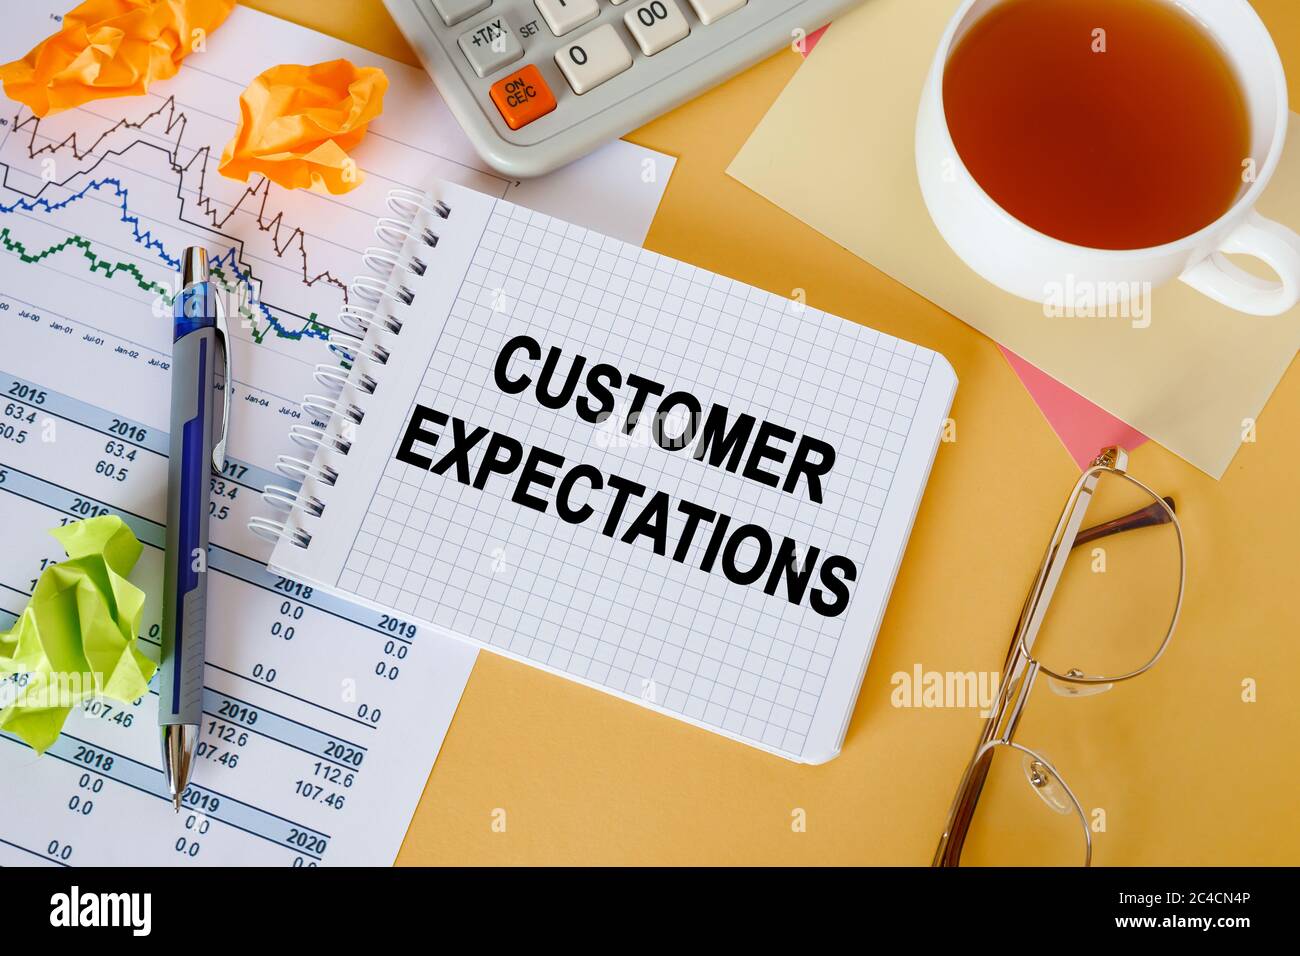 Customer Expectations is written on a notepad, on an office desk with office accessories. Stock Photo